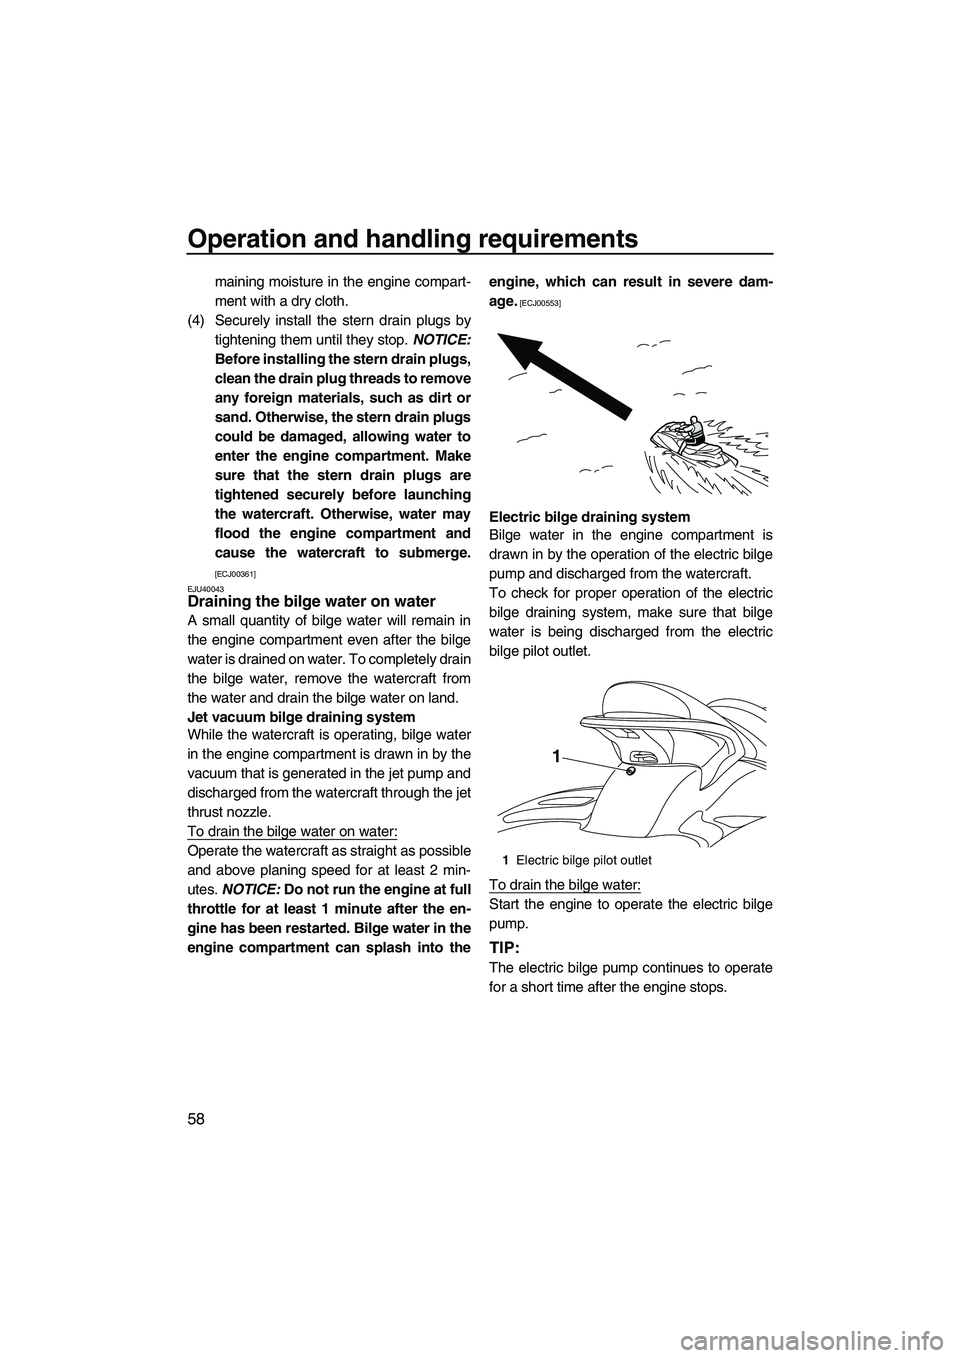 YAMAHA SVHO 2011  Owners Manual Operation and handling requirements
58
maining moisture in the engine compart-
ment with a dry cloth.
(4) Securely install the stern drain plugs by
tightening them until they stop. NOTICE:
Before inst